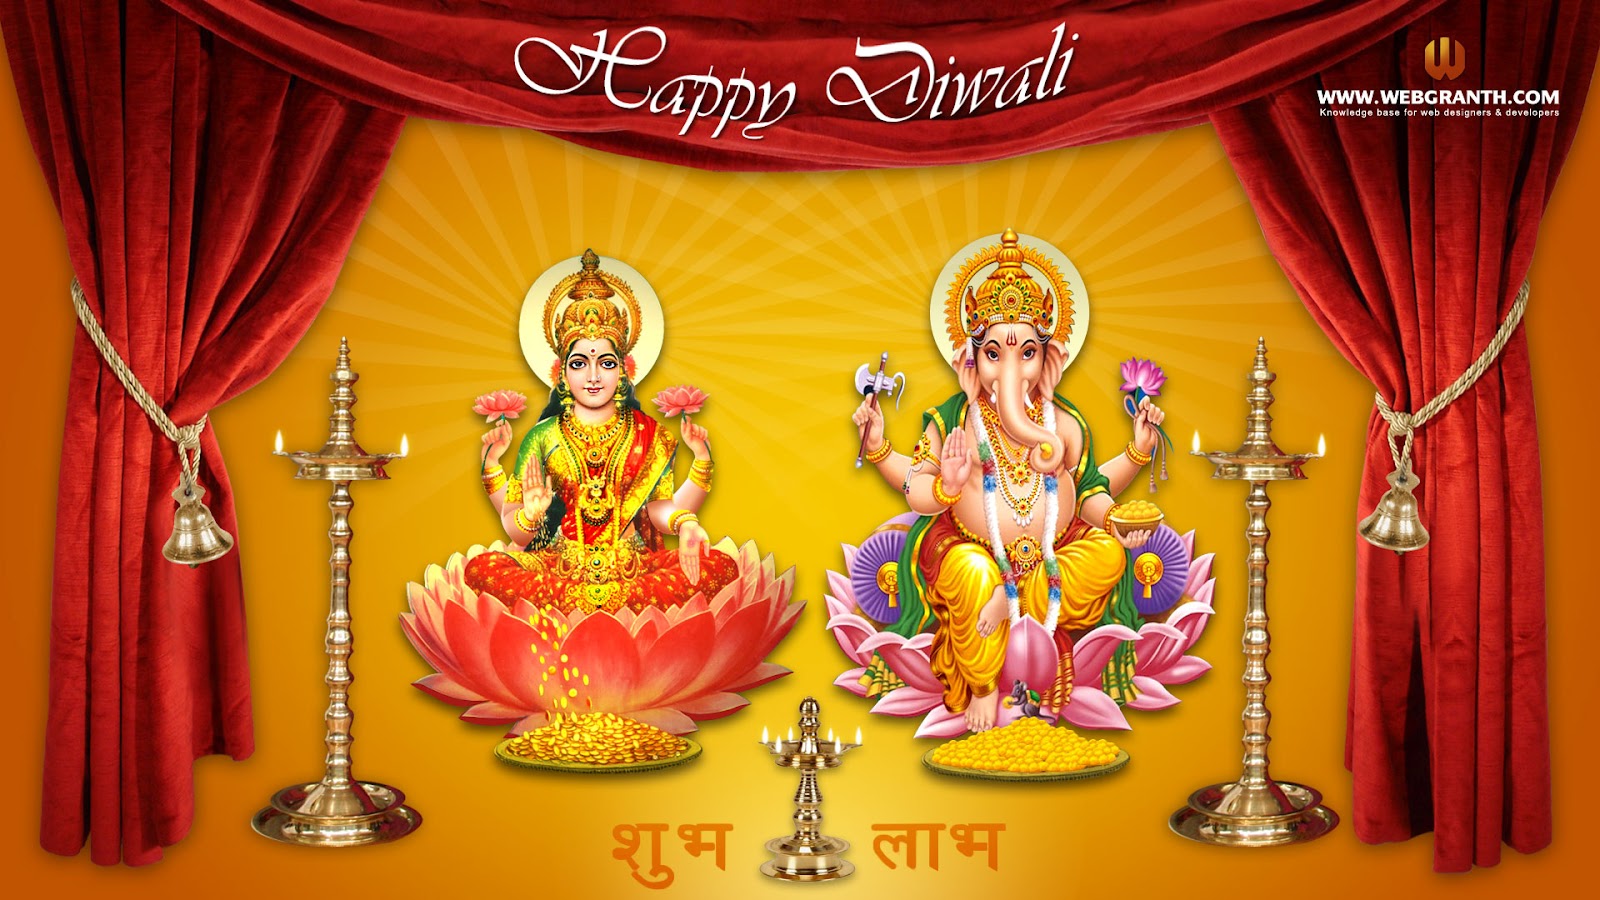 ALL-IN-ONE WALLPAPERS: Happy Diwali Wishes Greetings Cards ...